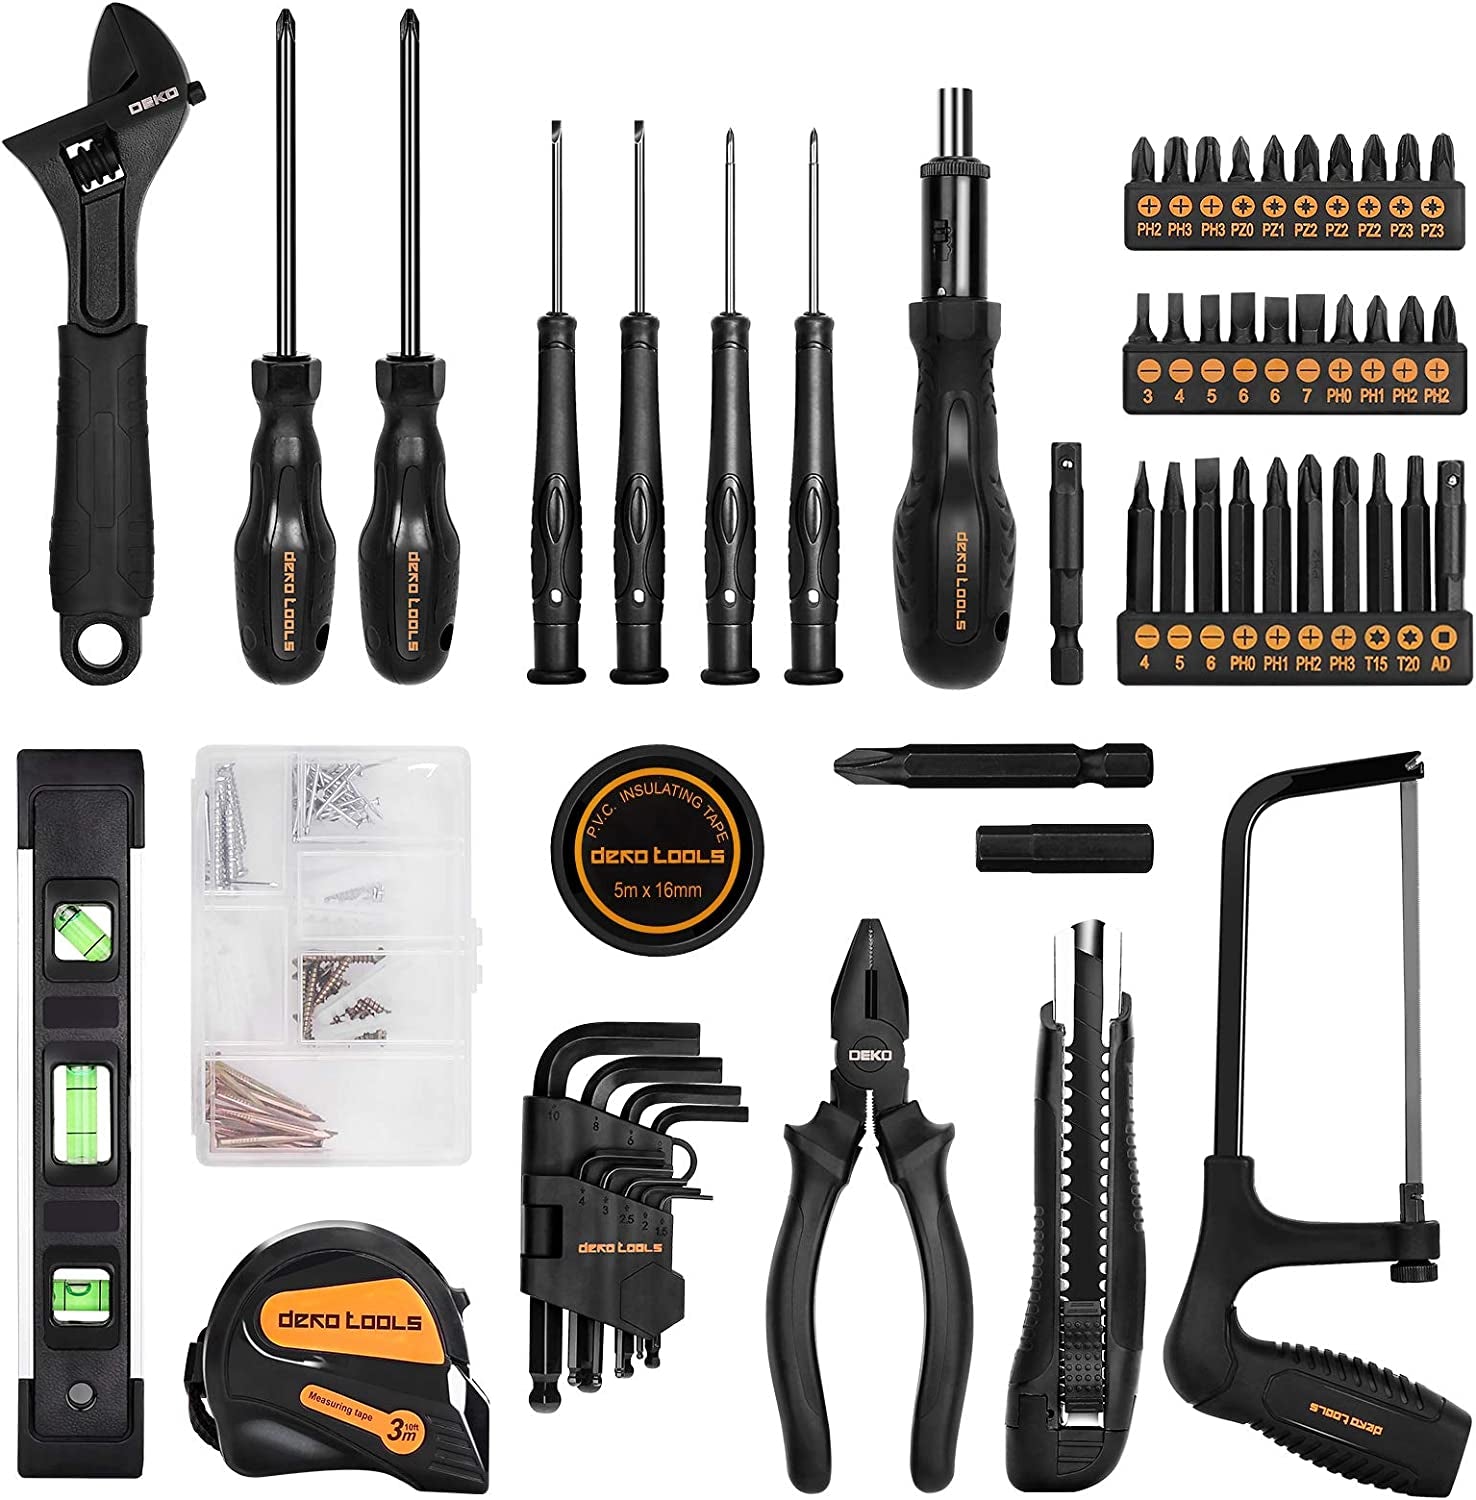 218-Piece General Household Hand Tool Kit, Professional Auto Repair Tool Set for Homeowner, General Household Hand Tool Set with Plier, Screwdriver Set, Socket Set, with Portable Storage Case